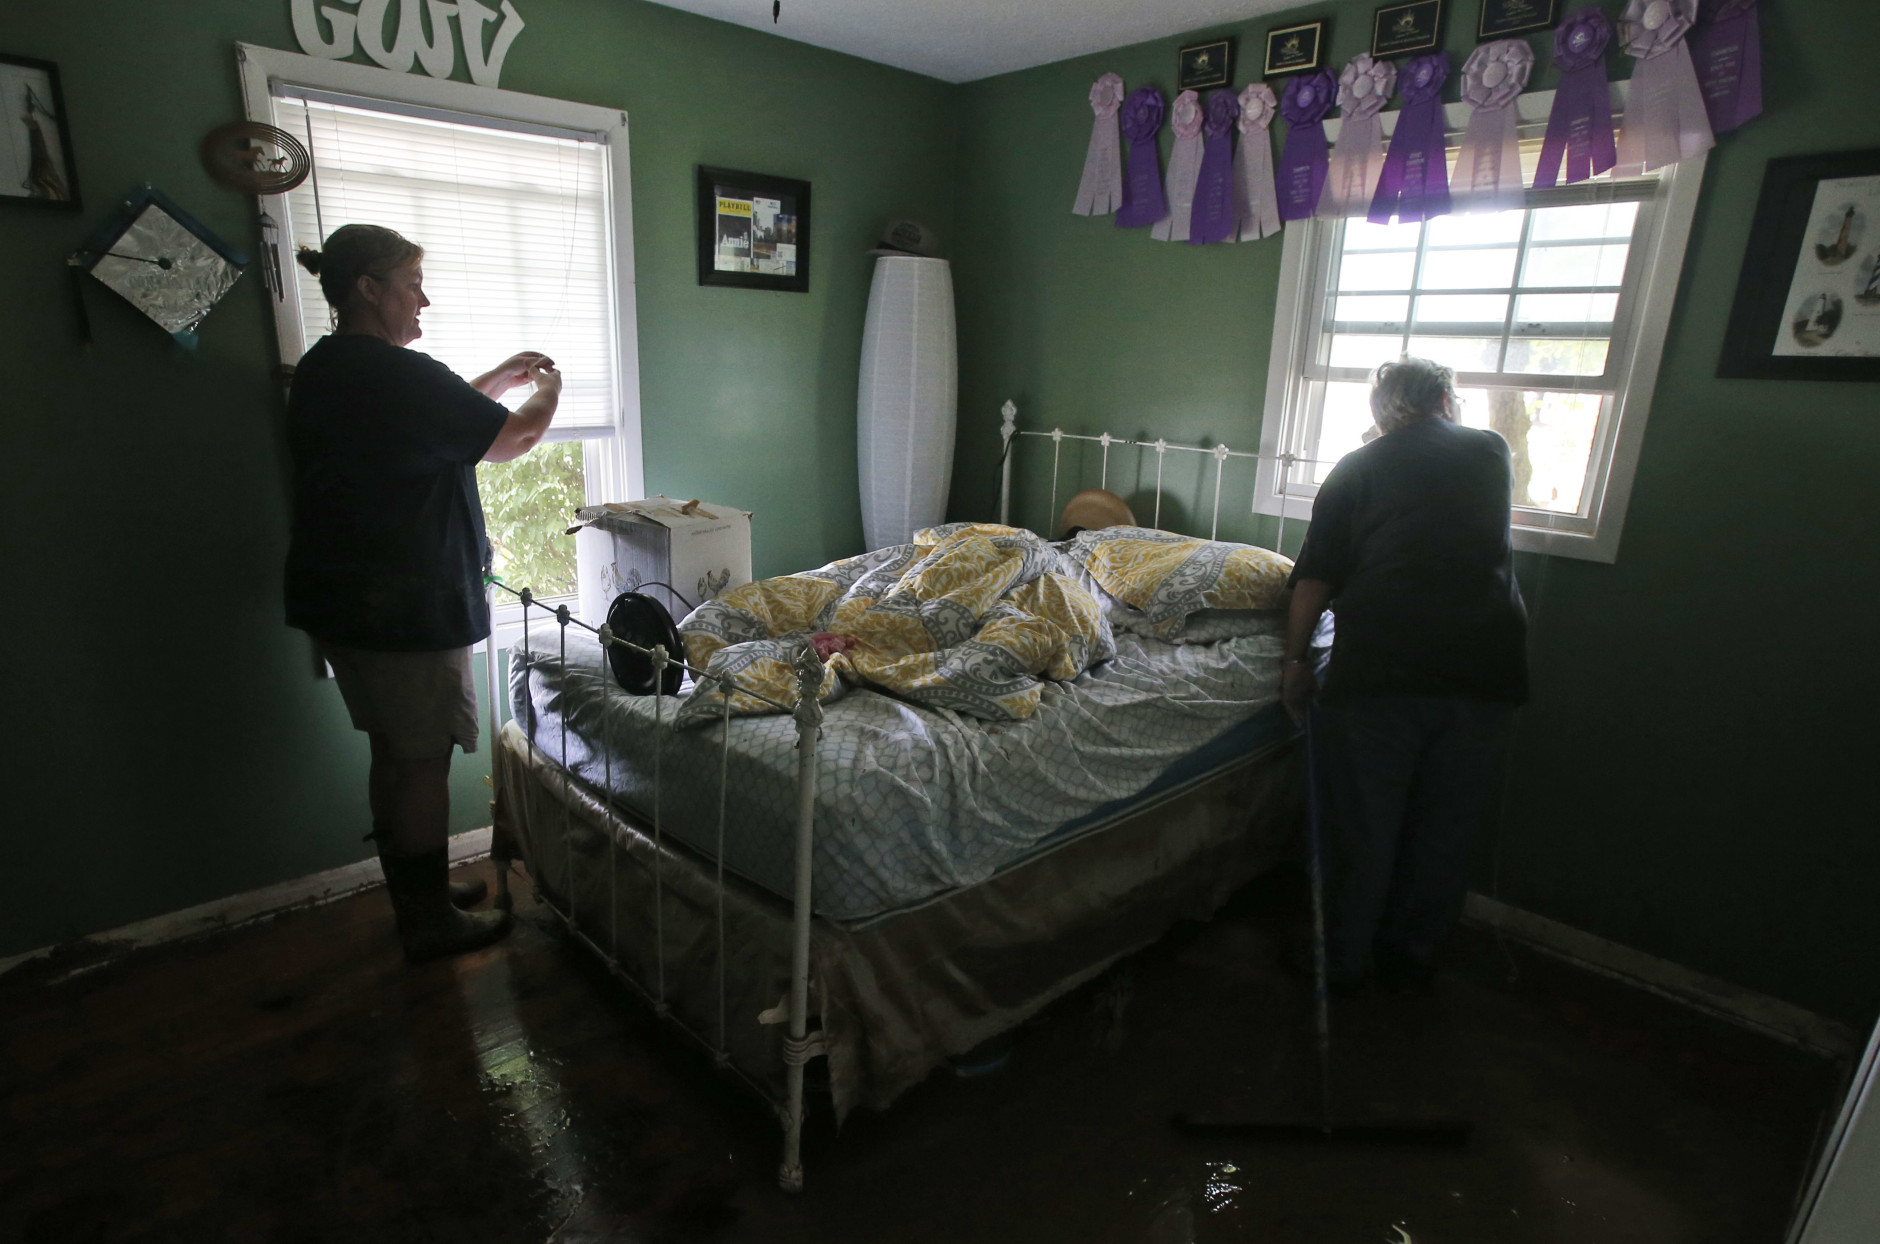 Kelly Vaughan, left, looks over flood damaged belongings in her fathers home with a neighbor as they clean up from severe flooding in White Sulphur Springs, W. Va., Friday, June 24, 2016. There were several fatalities around the state. (AP Photo/Steve Helber)